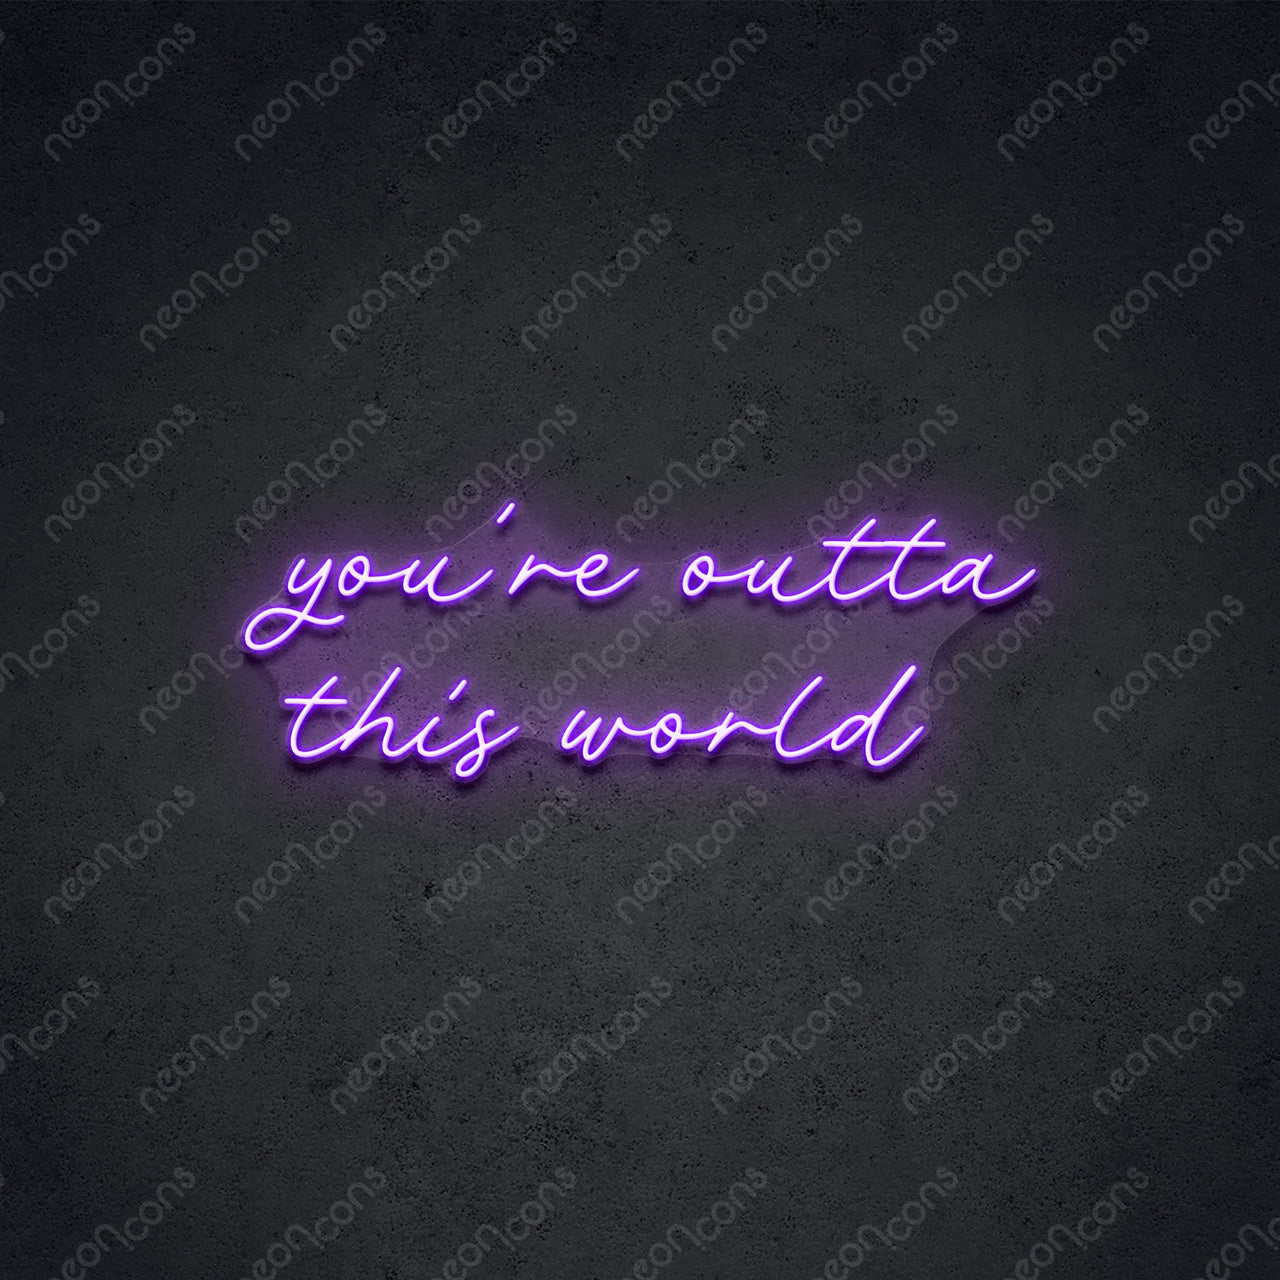 "You're Outta This World" LED Neon